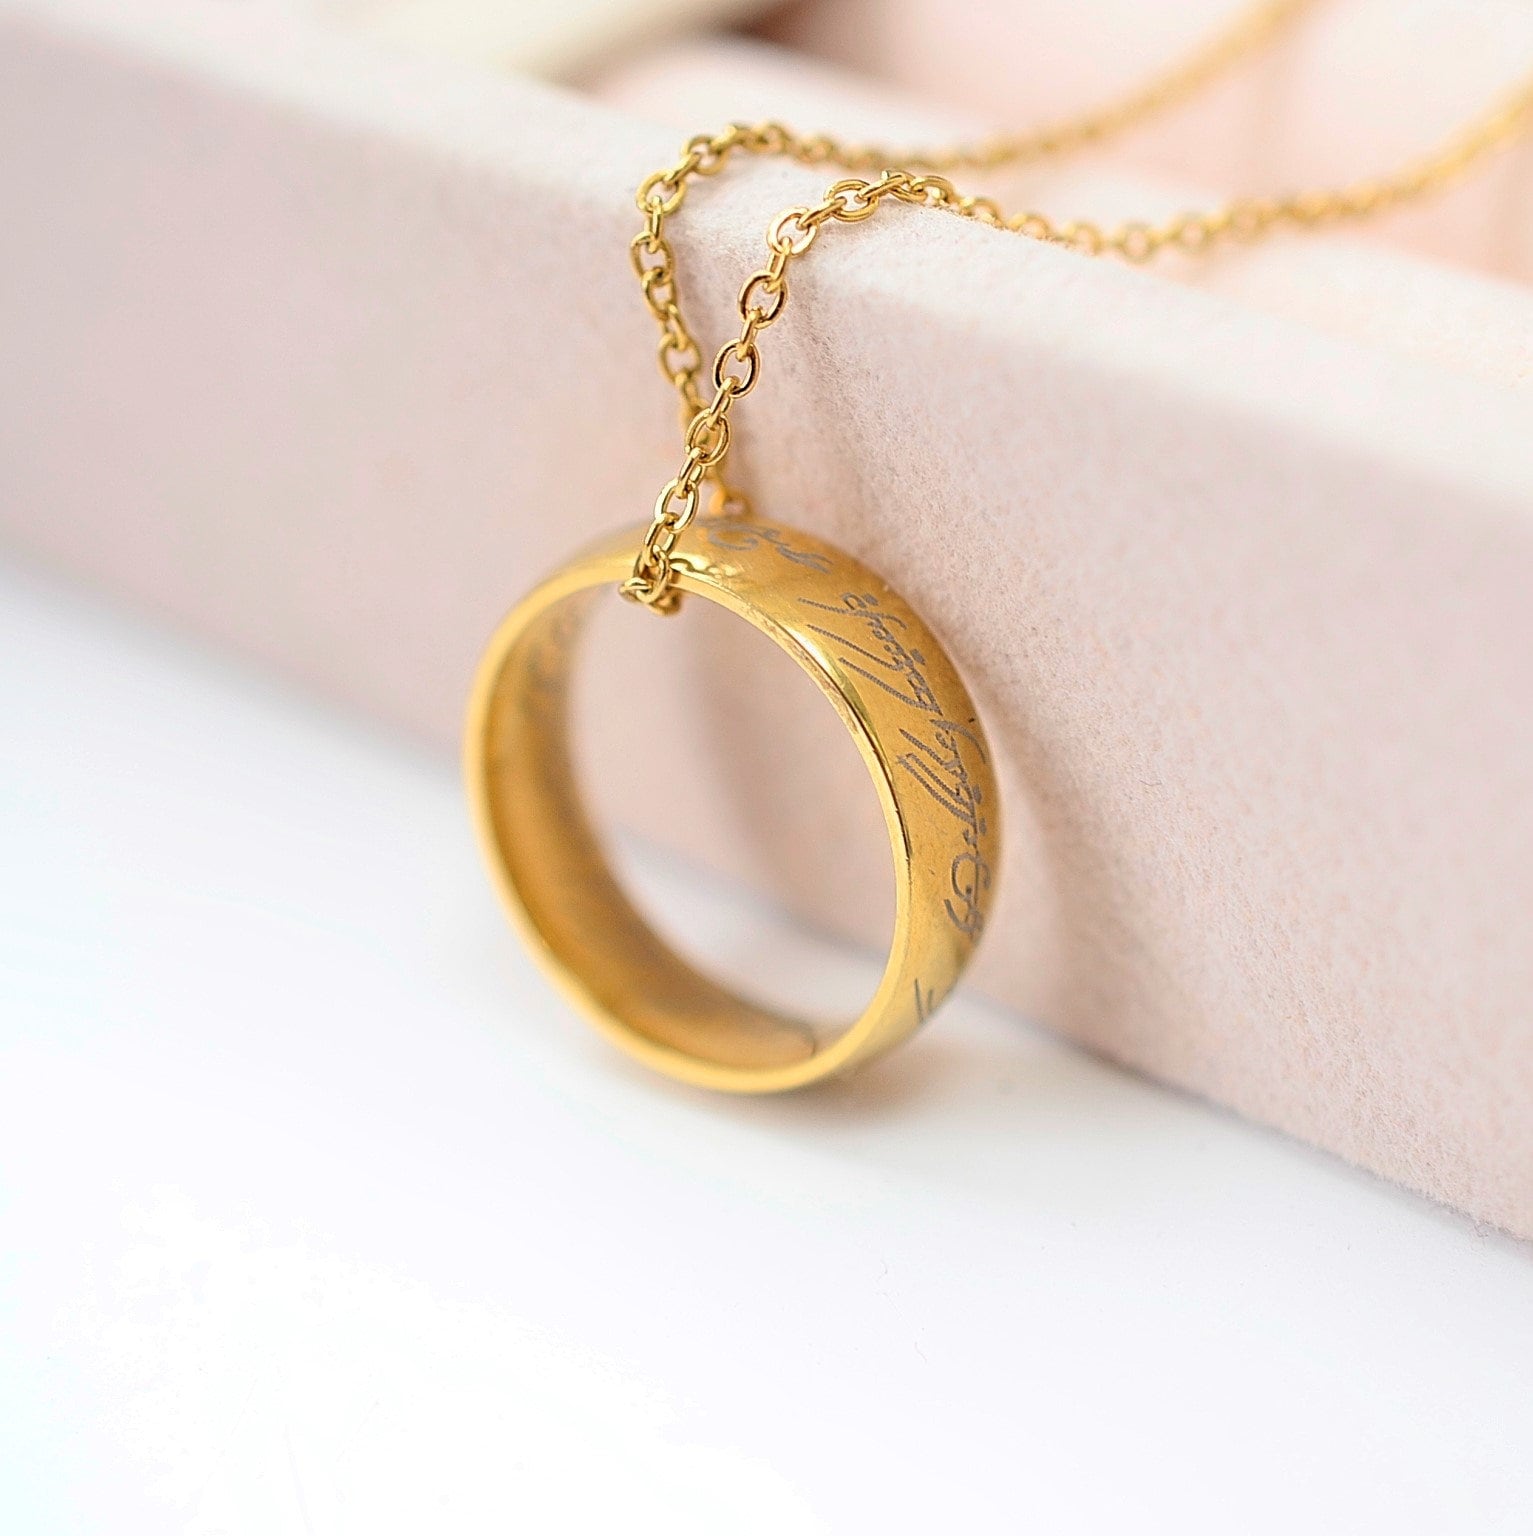 Hobbit Lord 'the Ring' Necklace 24k Gold Plated - Etsy Hong Kong